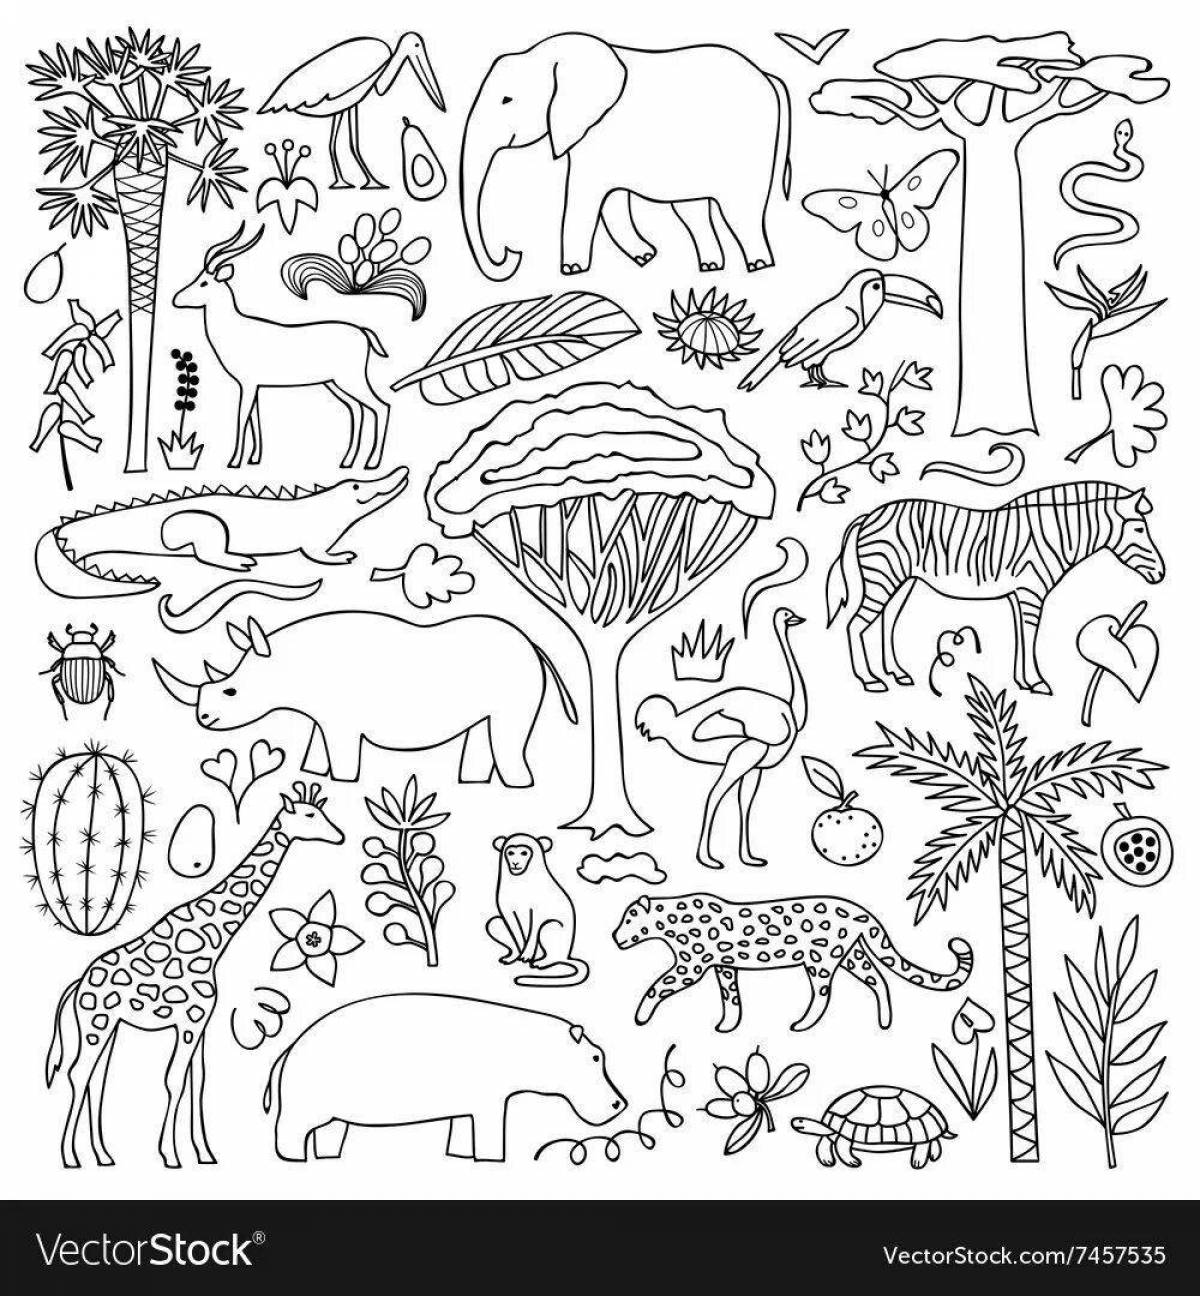 Amazing tropical animal coloring pages